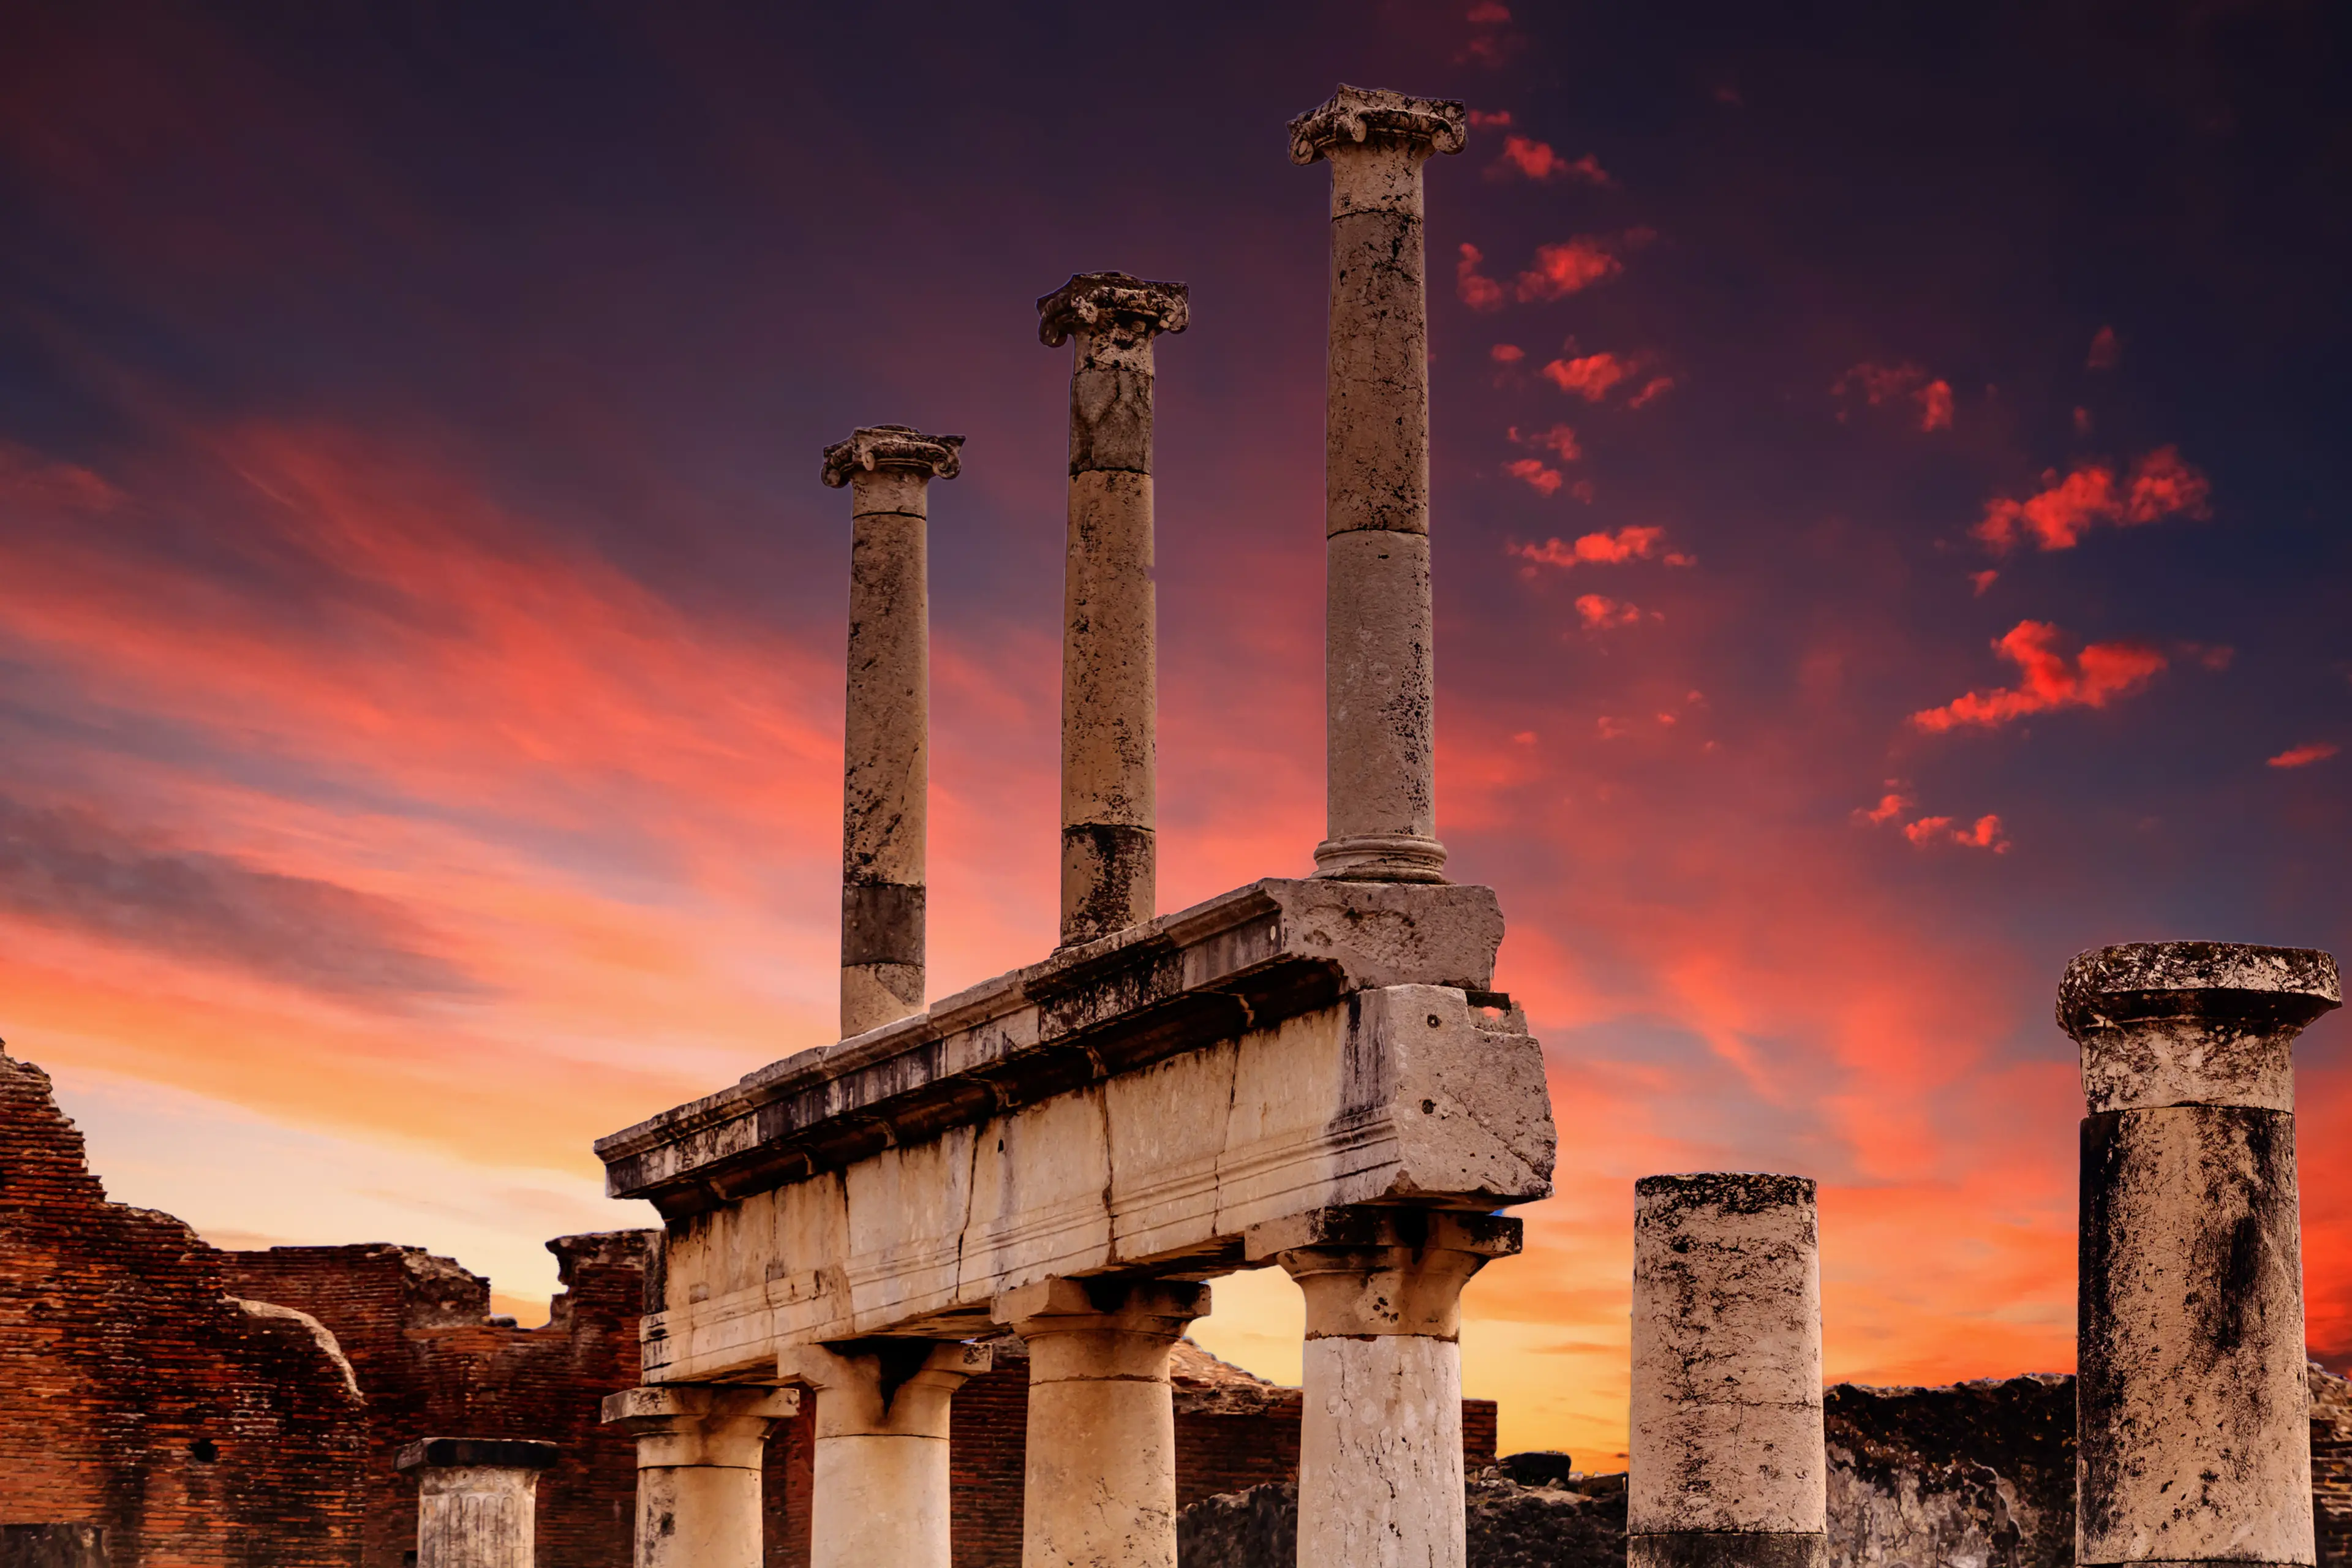 Pompeii Day Tour: Romantic Sightseeing and Wine Tasting for Couples